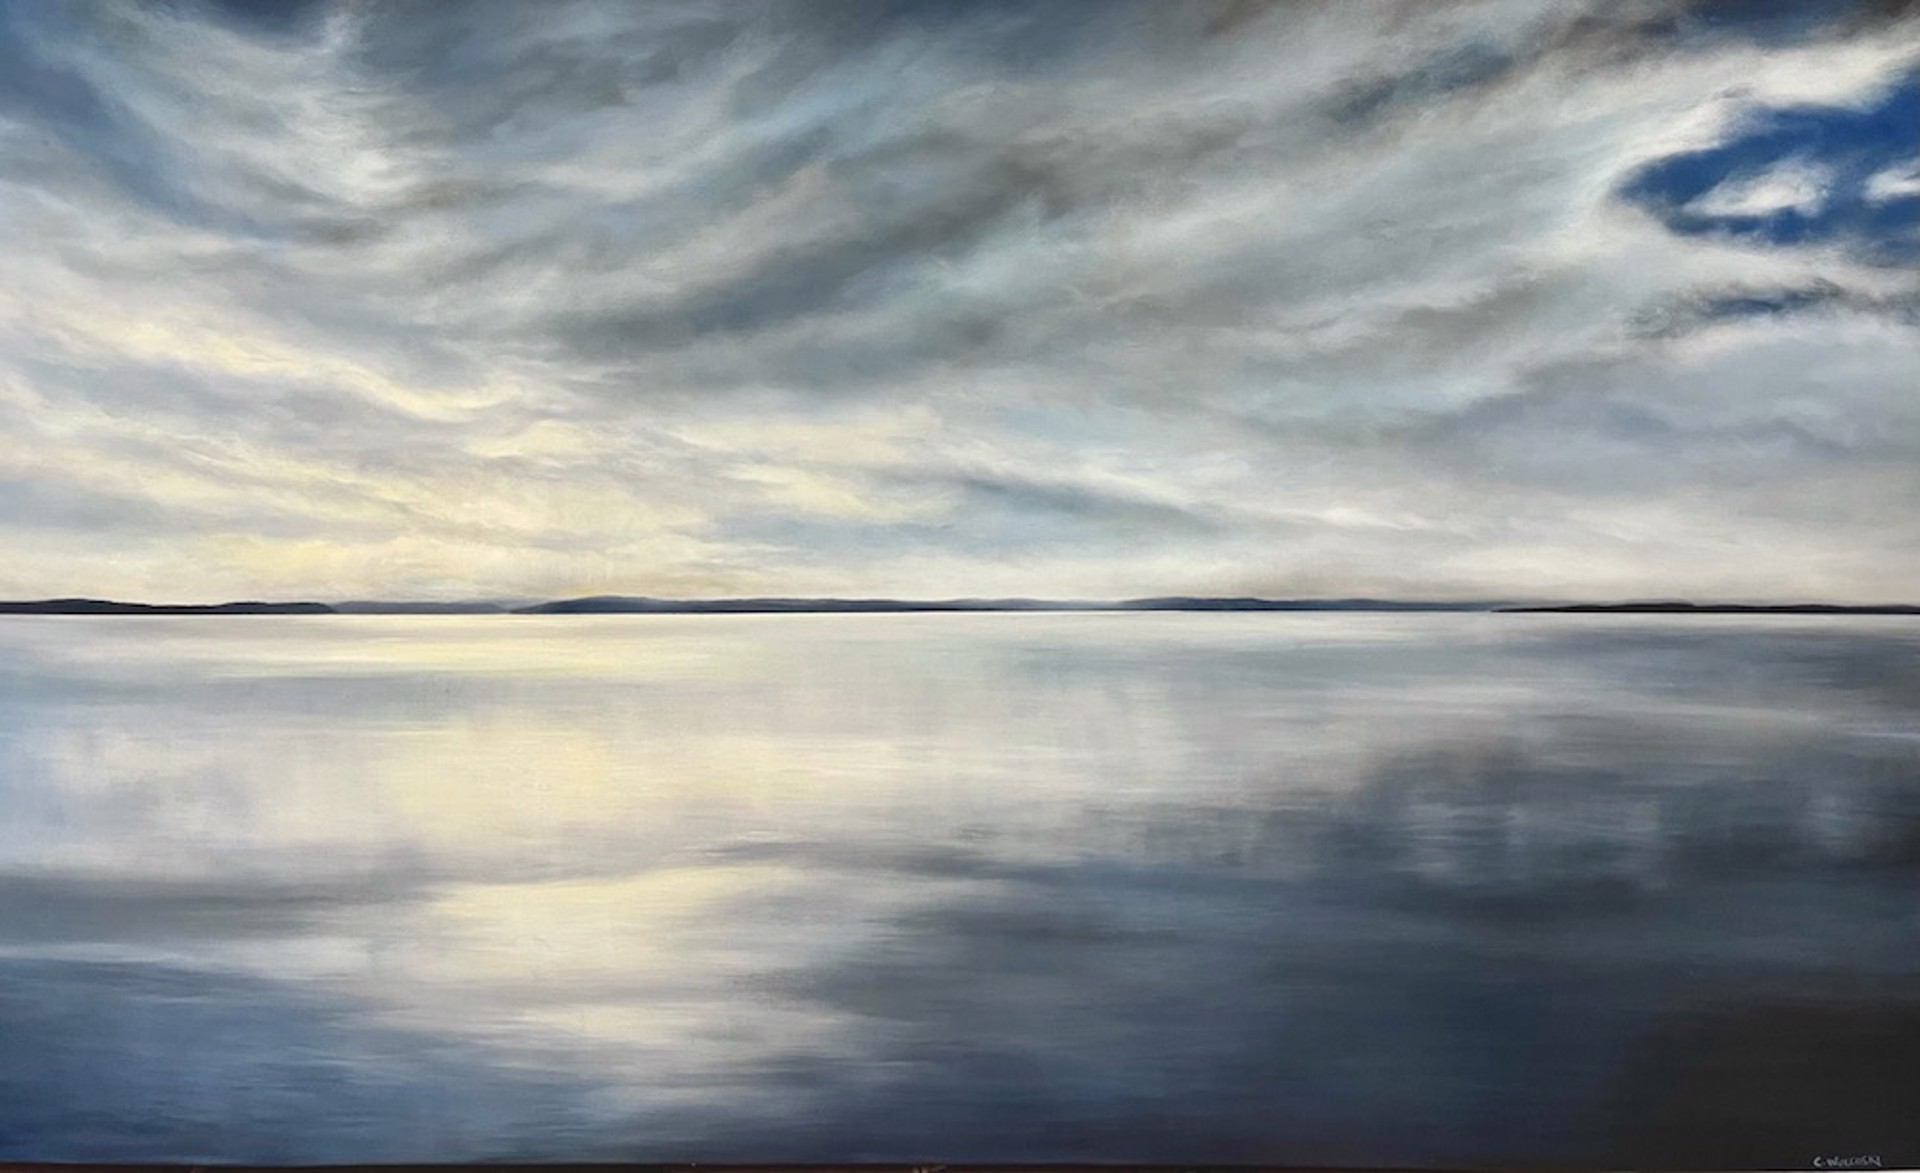 Reflections on the Water by Corrinne Wolcoski